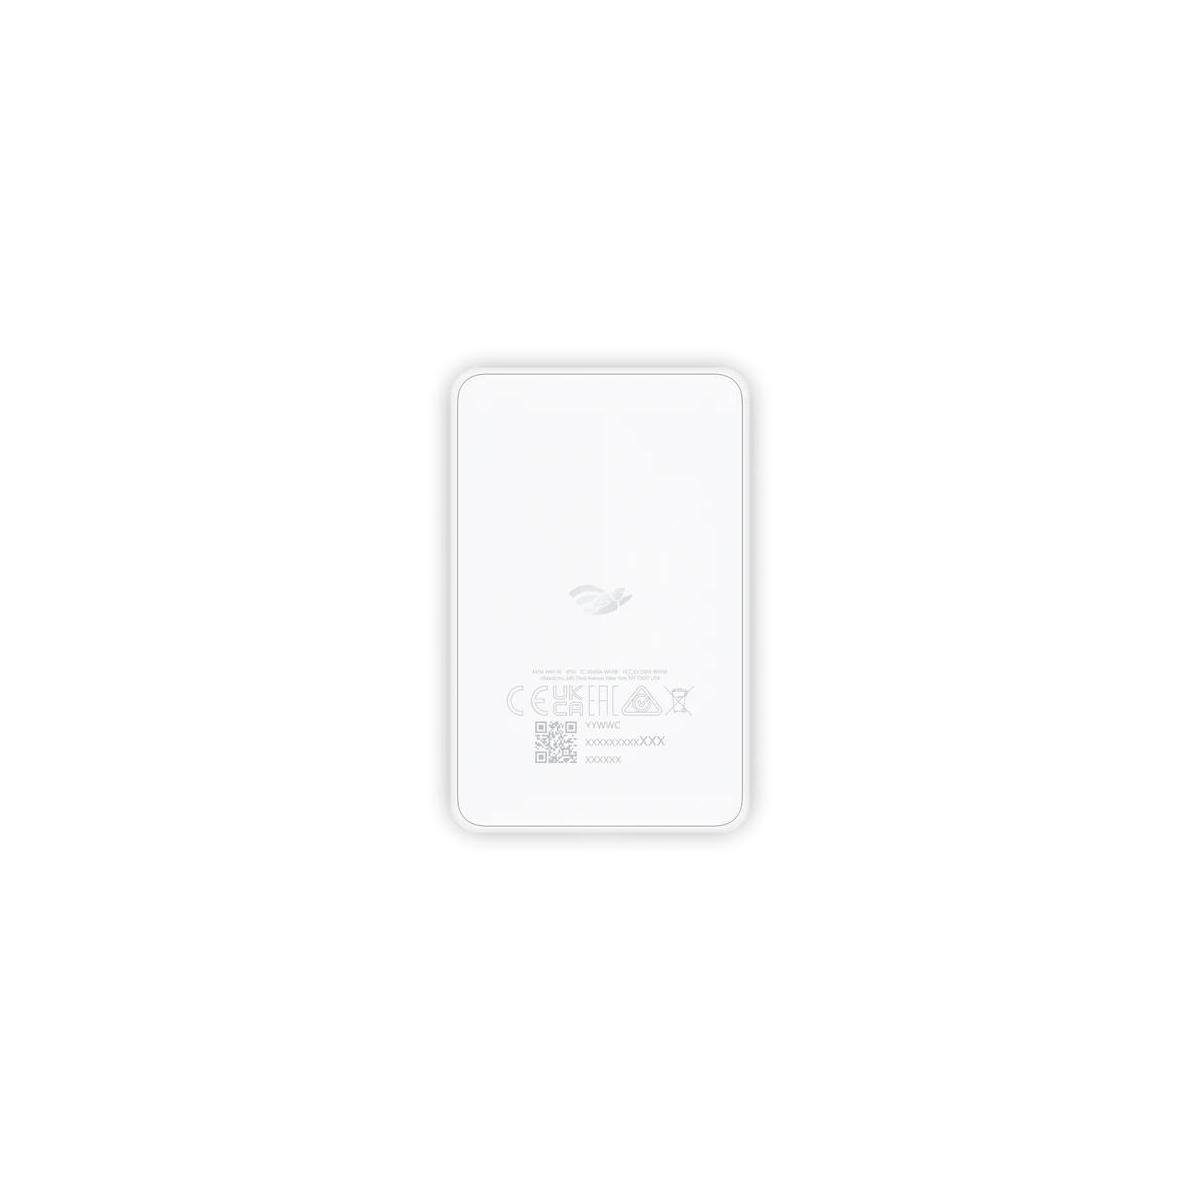 WiFiMan-Assistent WLAN-Antenne Networks Ubiquiti